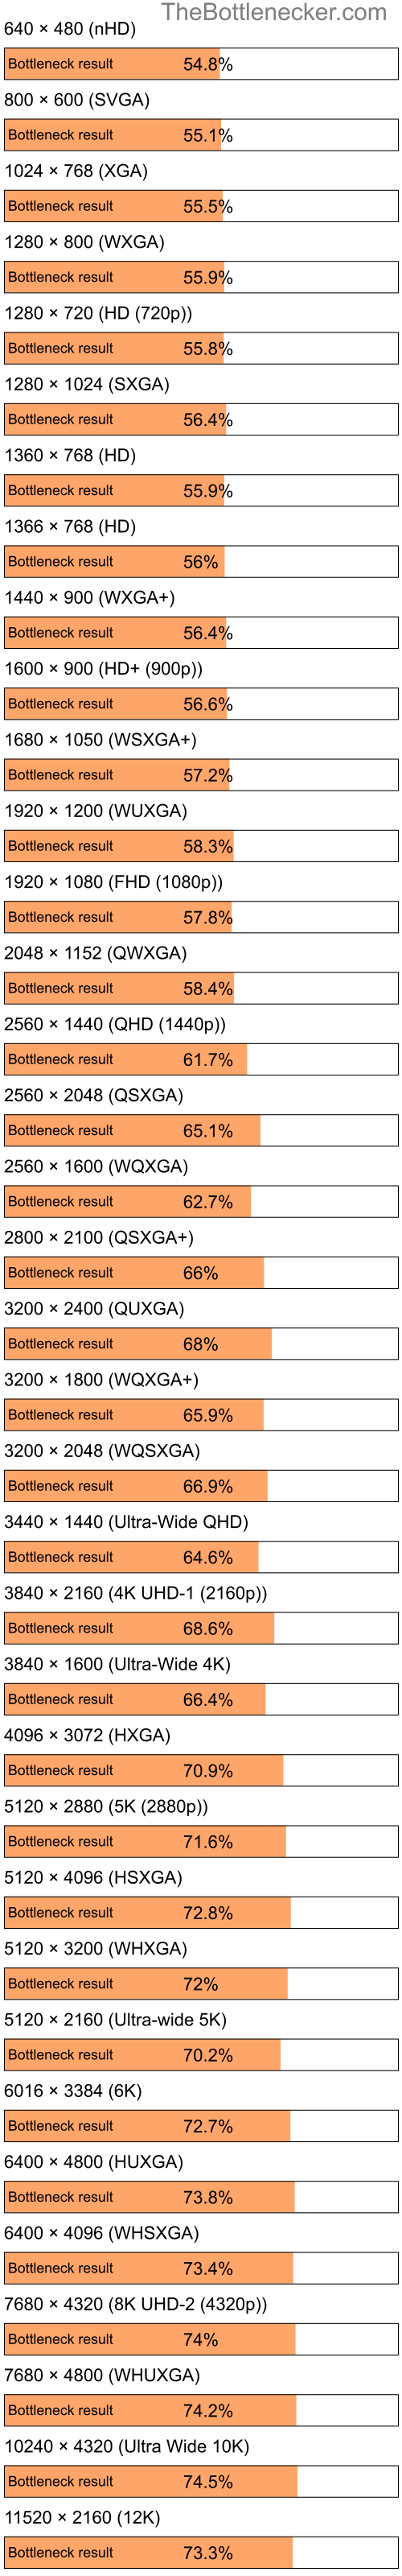 Bottleneck results by resolution for Intel Pentium 4 and AMD Radeon HD 4270 in General Tasks